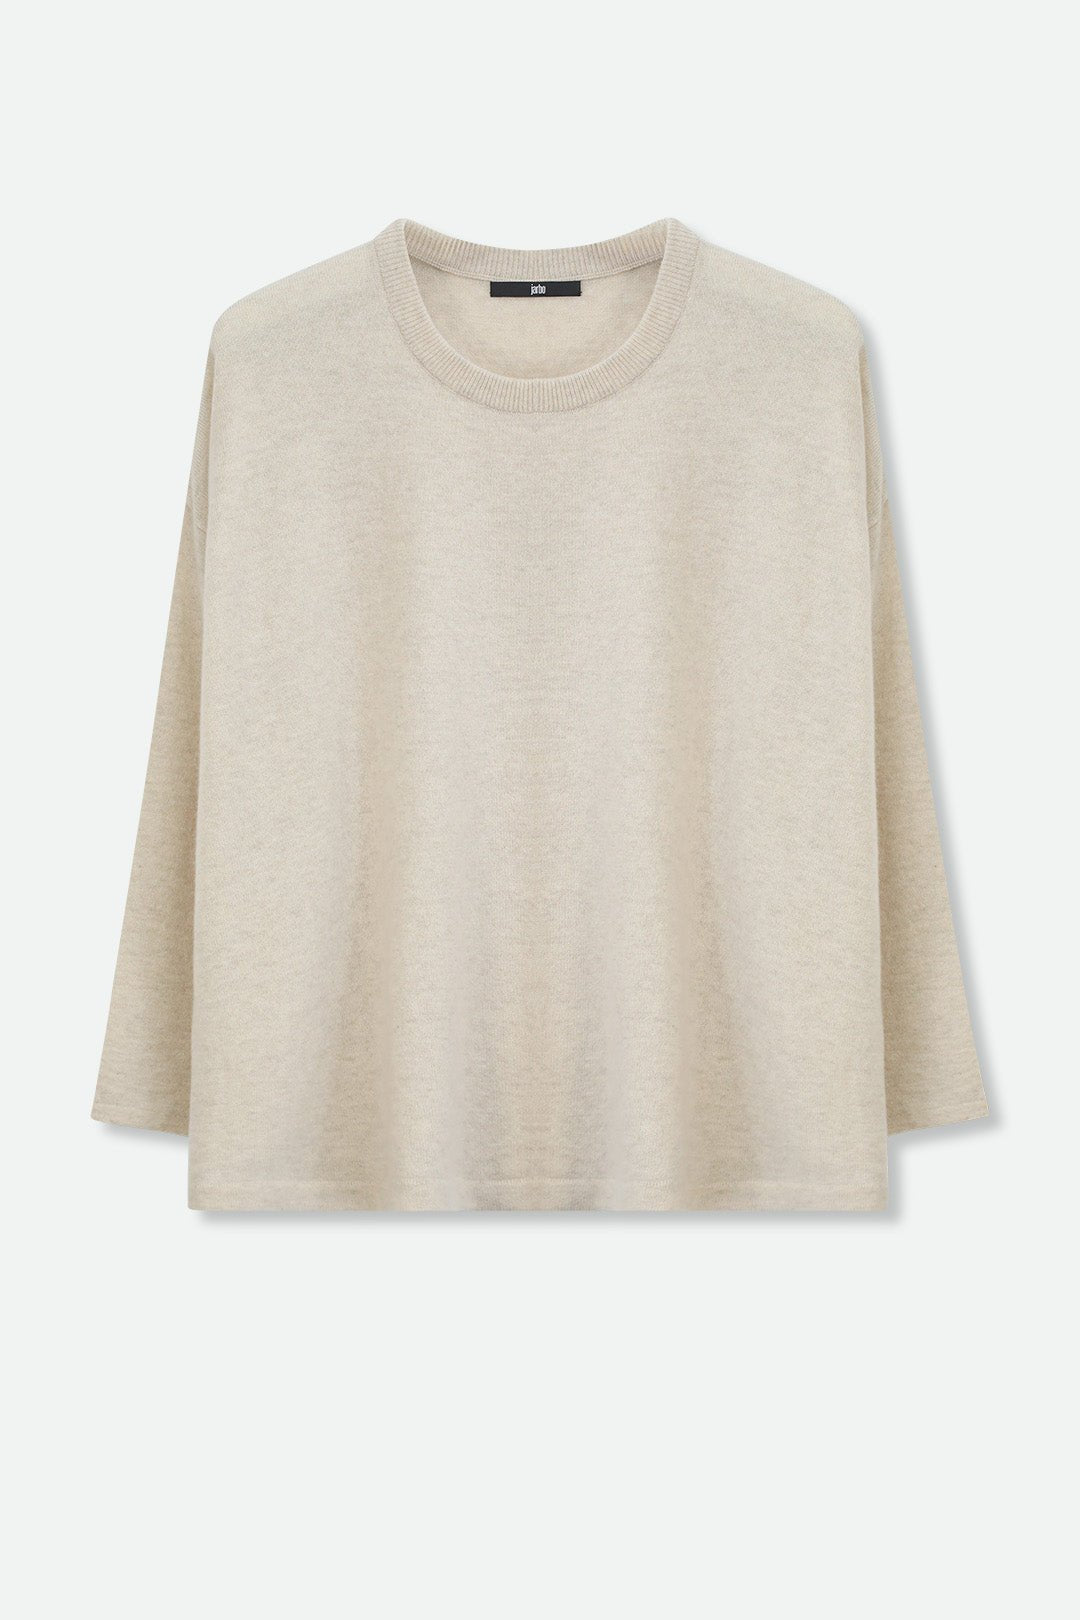 MARLOW OVERSIZED BOXY CREW IN CASHMERE BLEND - Jarbo